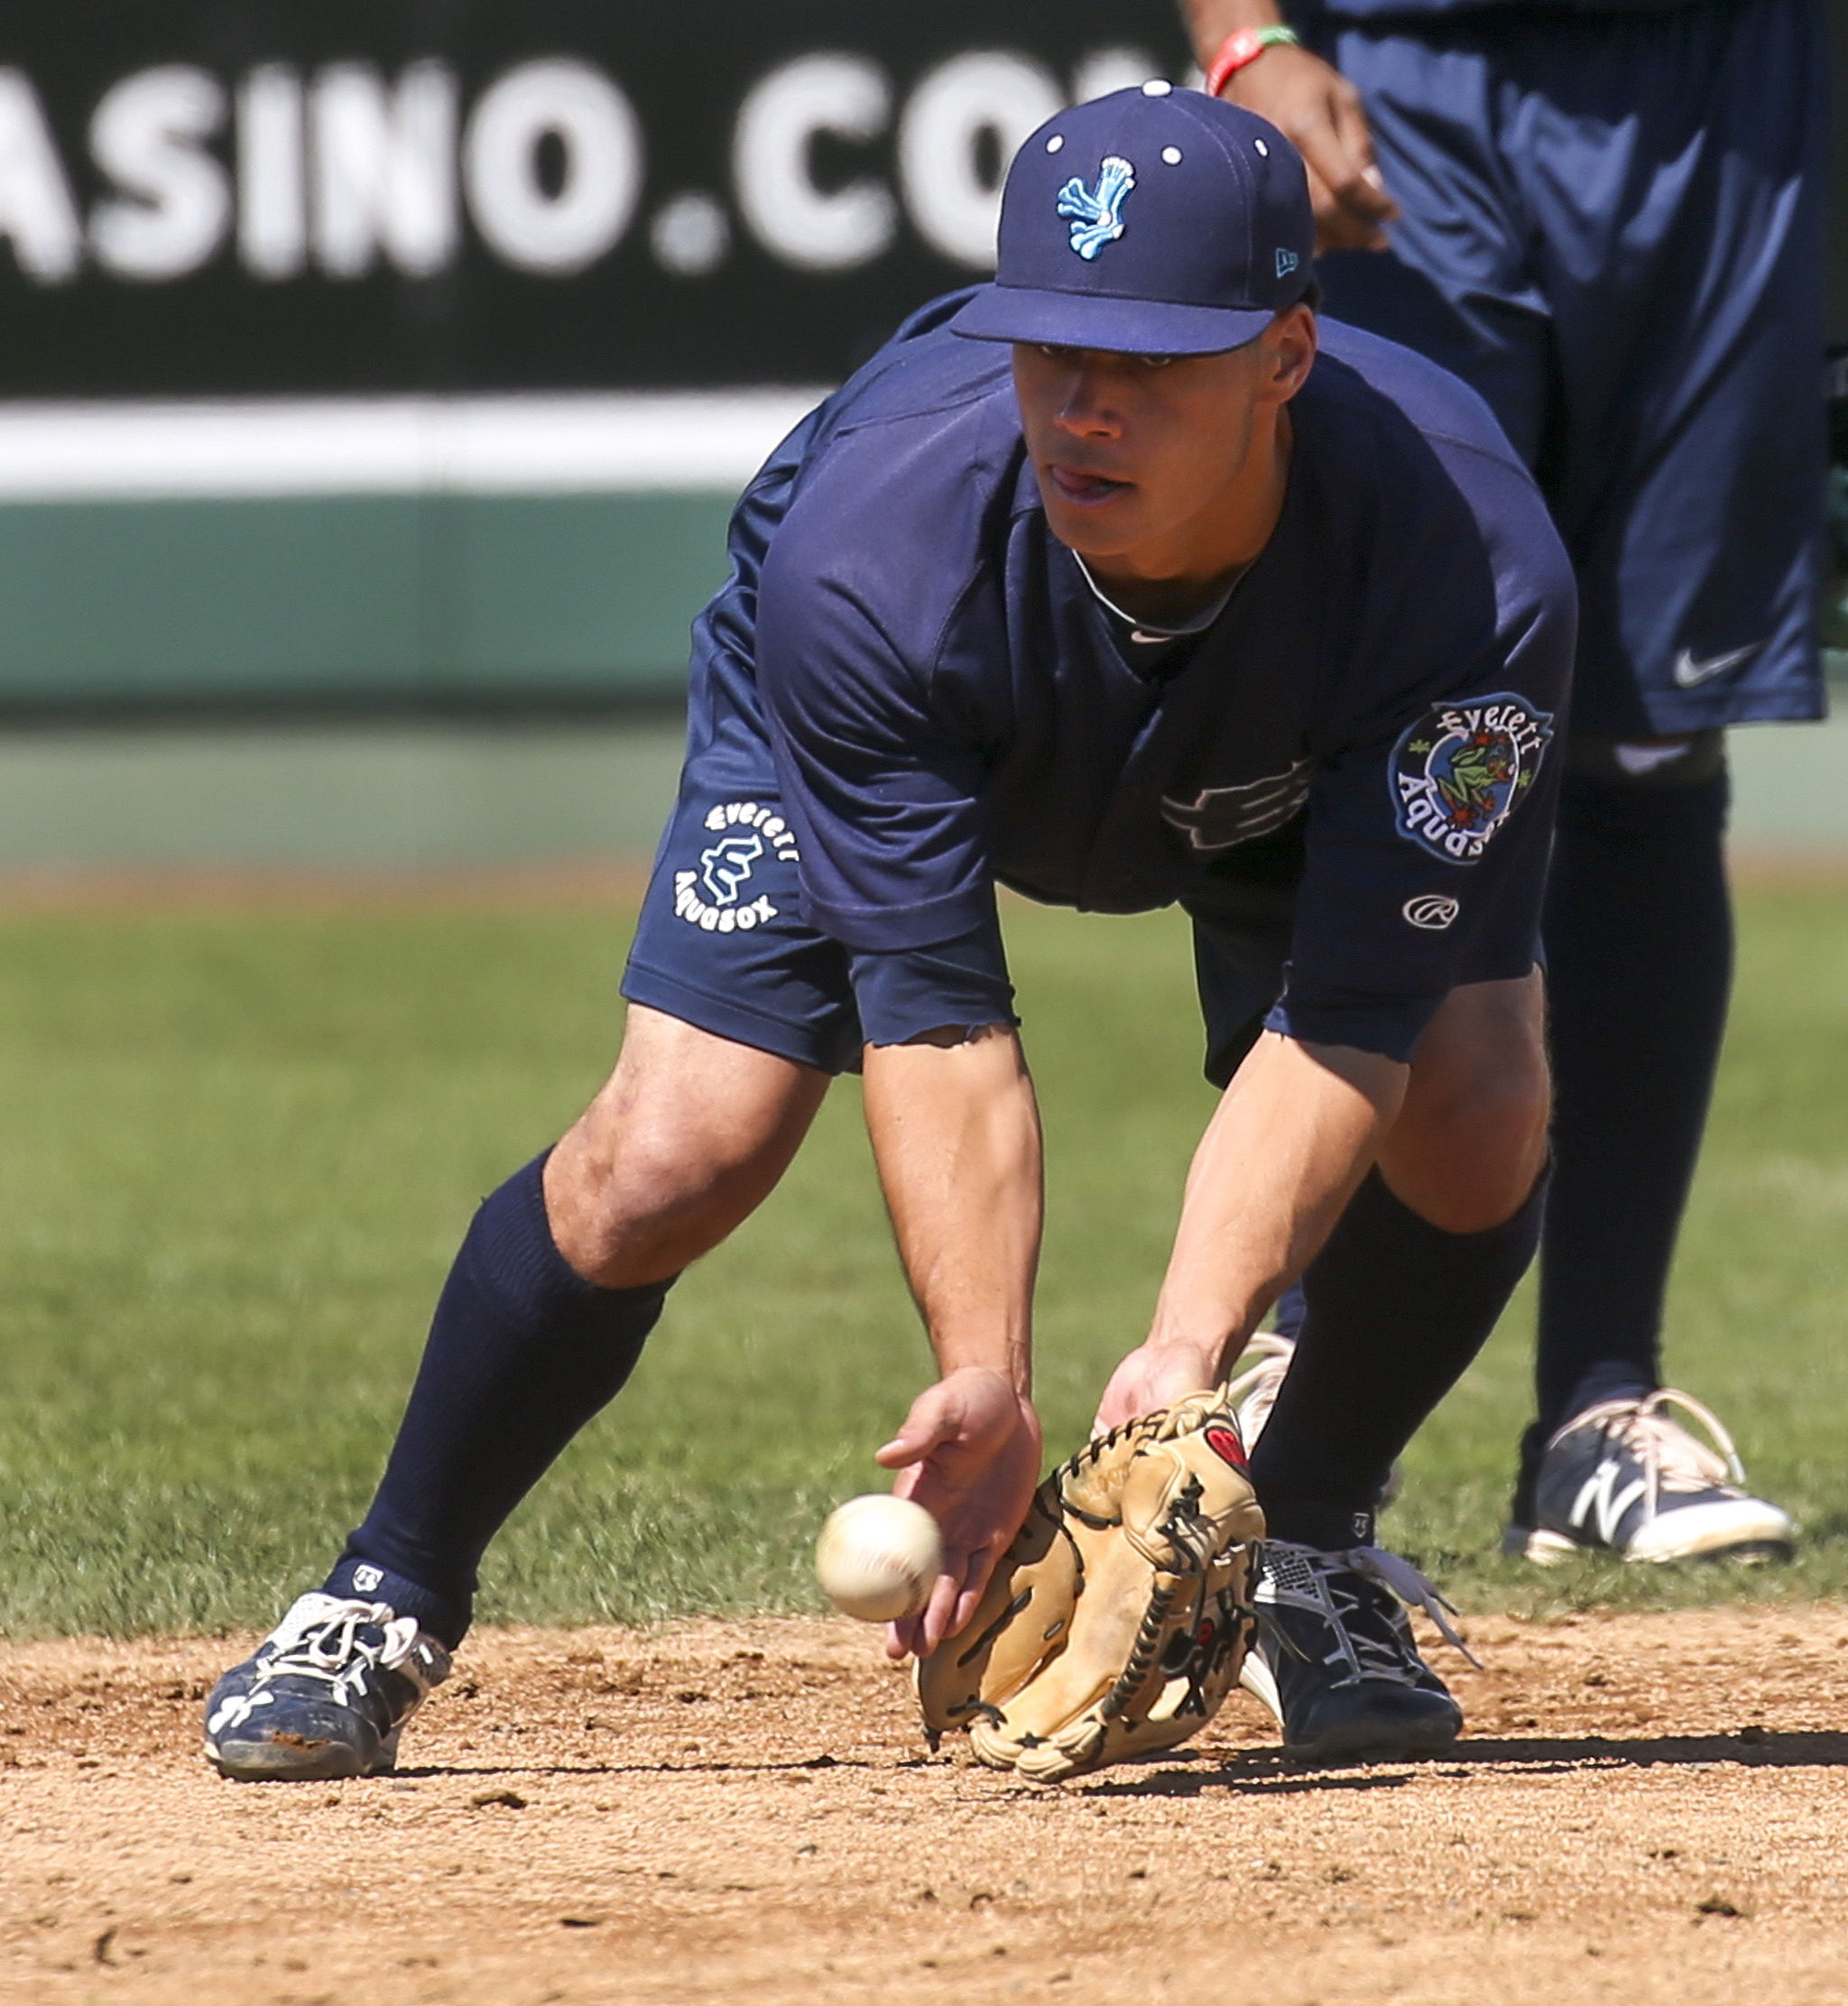 The AquaSox’s Bryson Brigman fields a grounder during a practice Thursday afternoon at Everett Memorial Stadium.